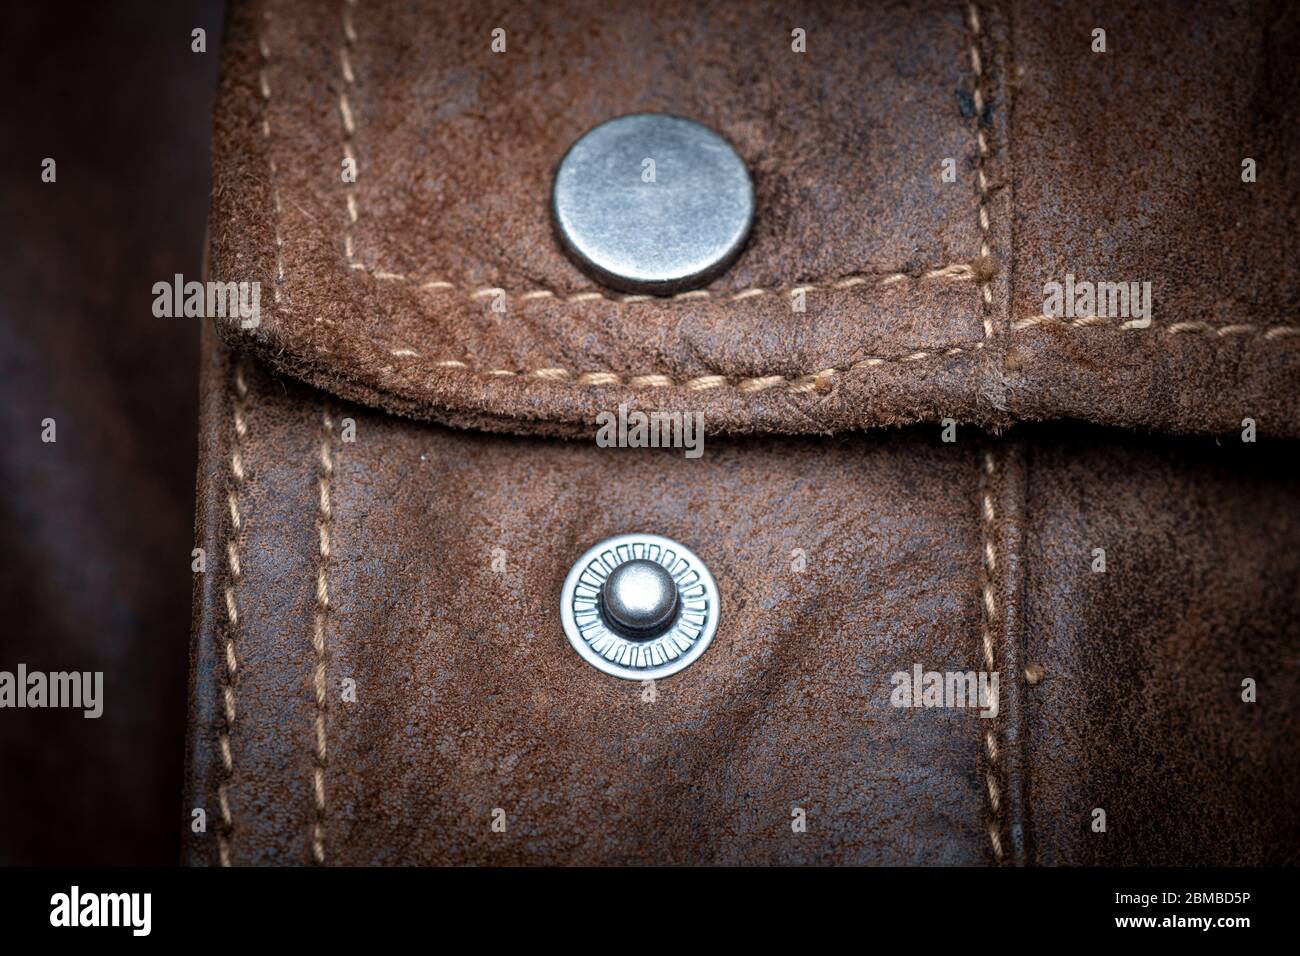 metal press stud fastener on a brown leather jacket, close up. Stock Photo